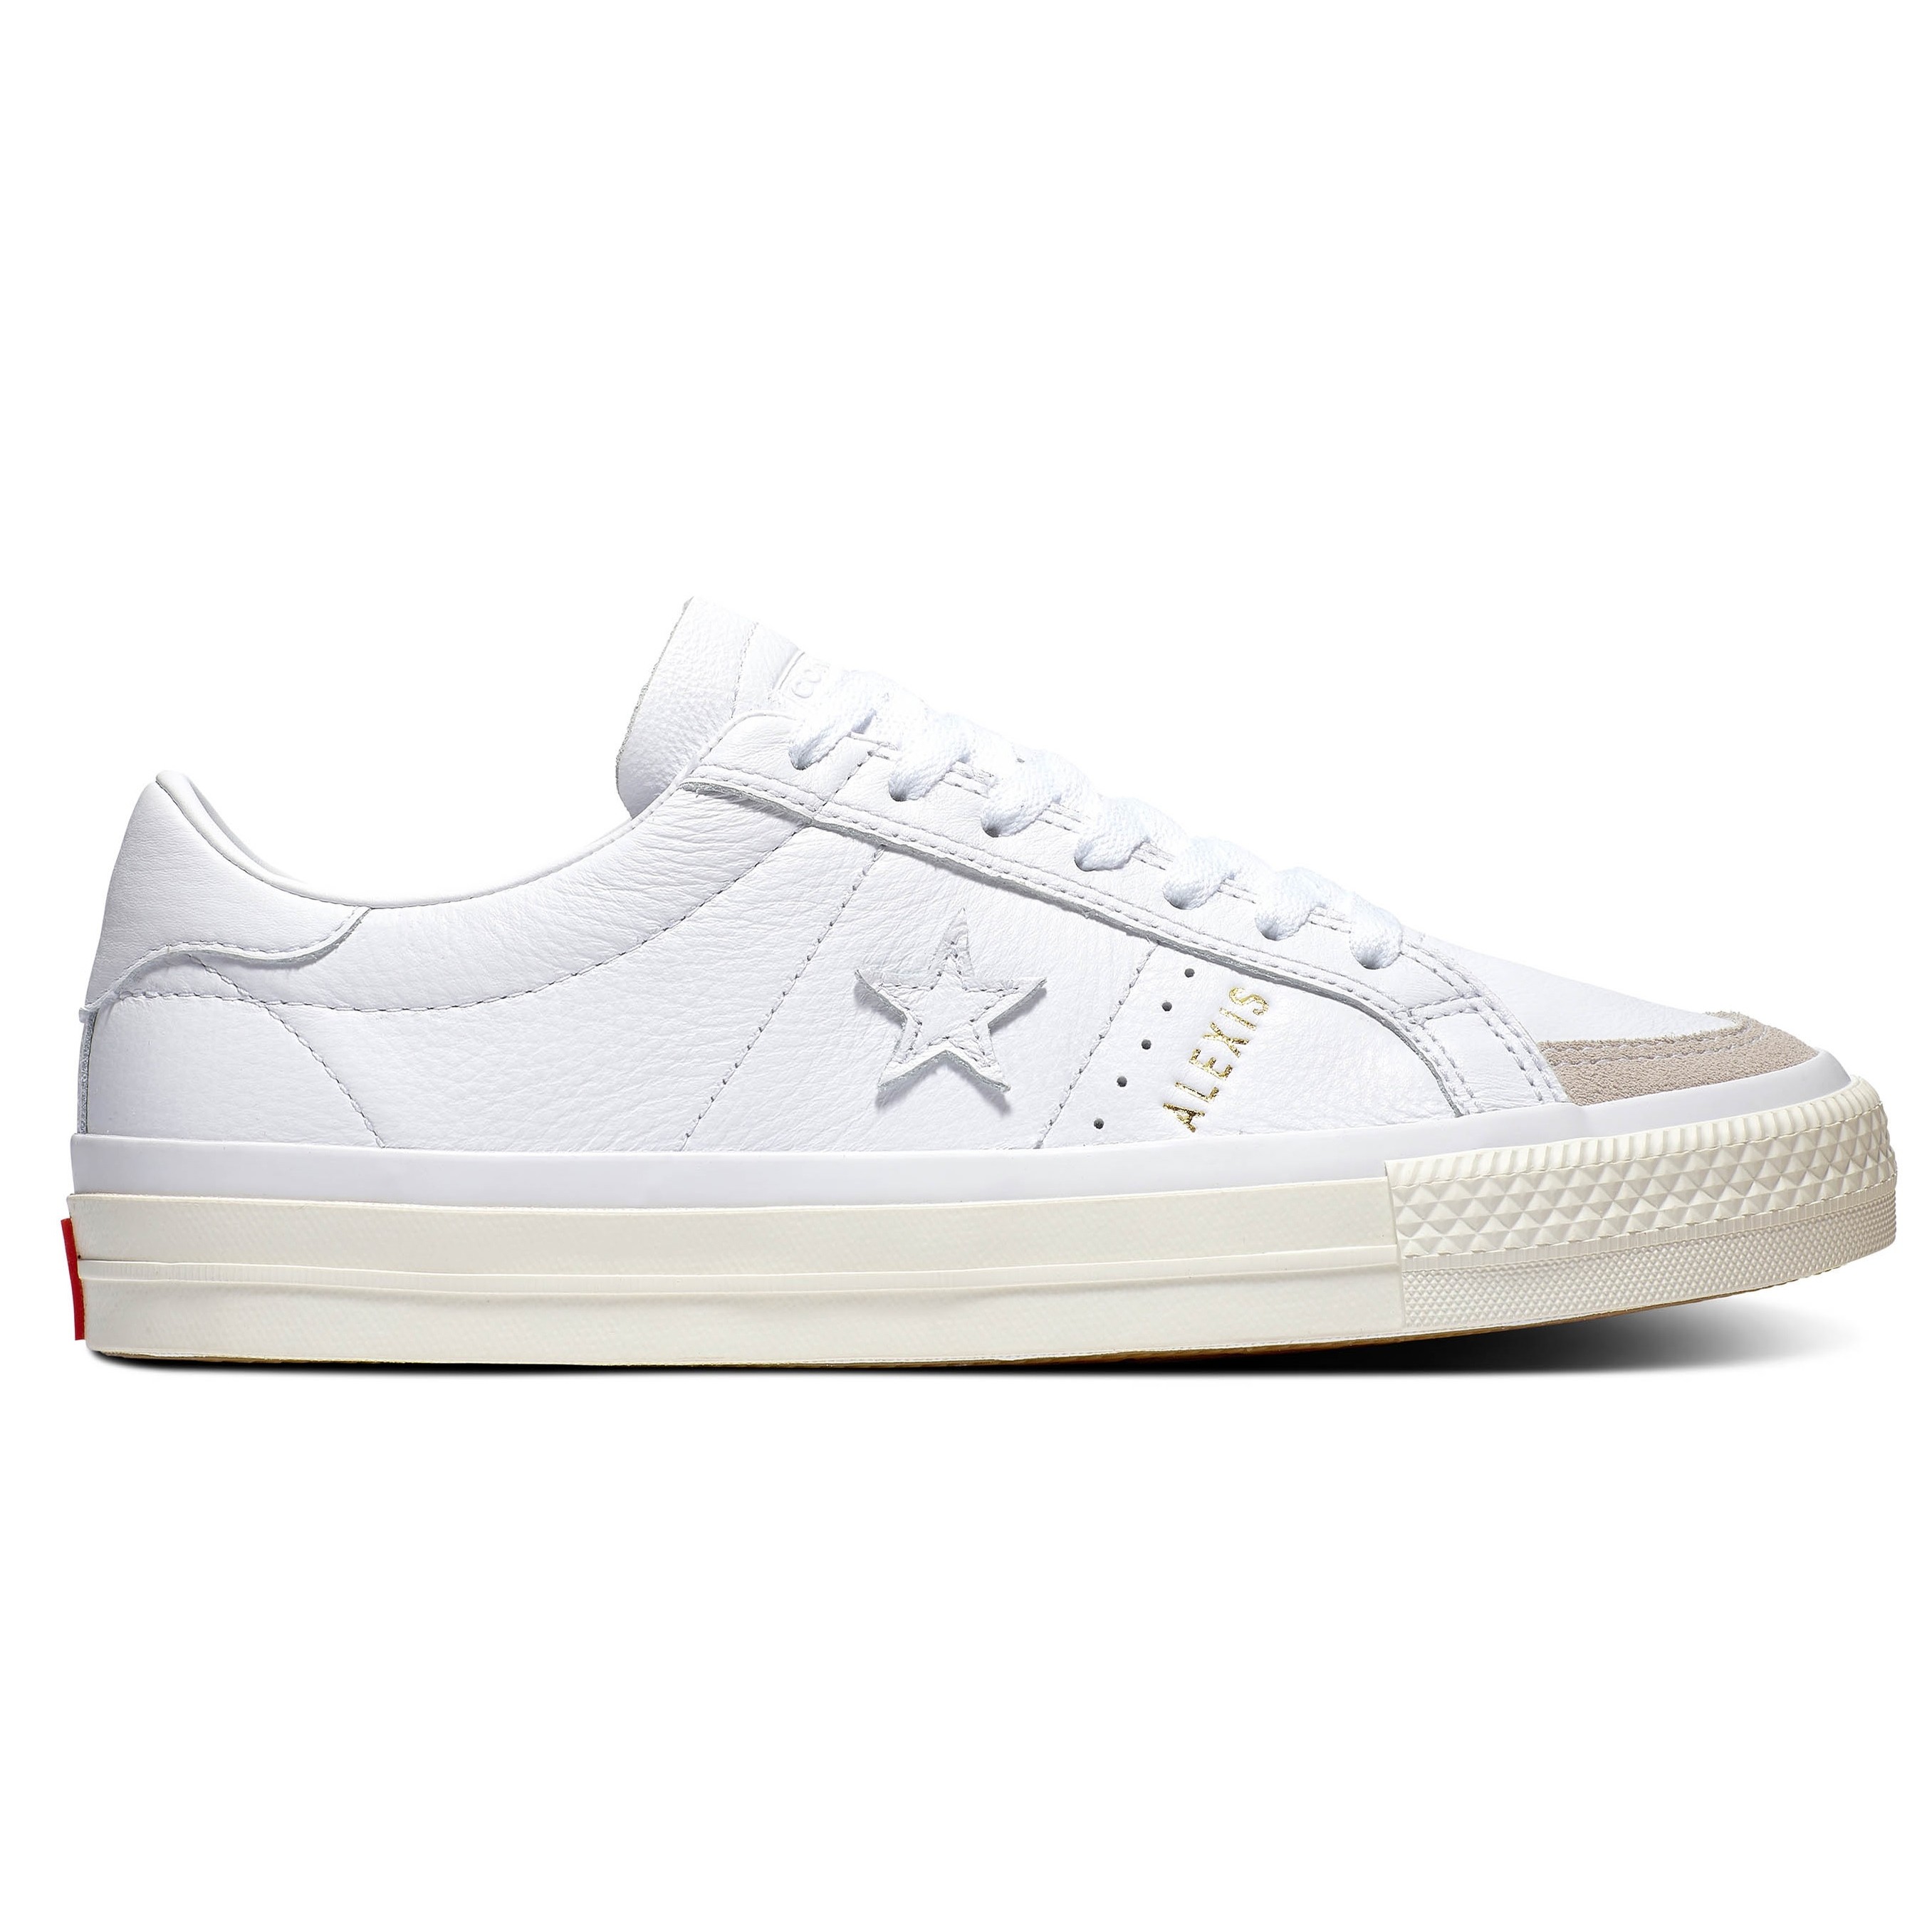 converse one star ox white leather